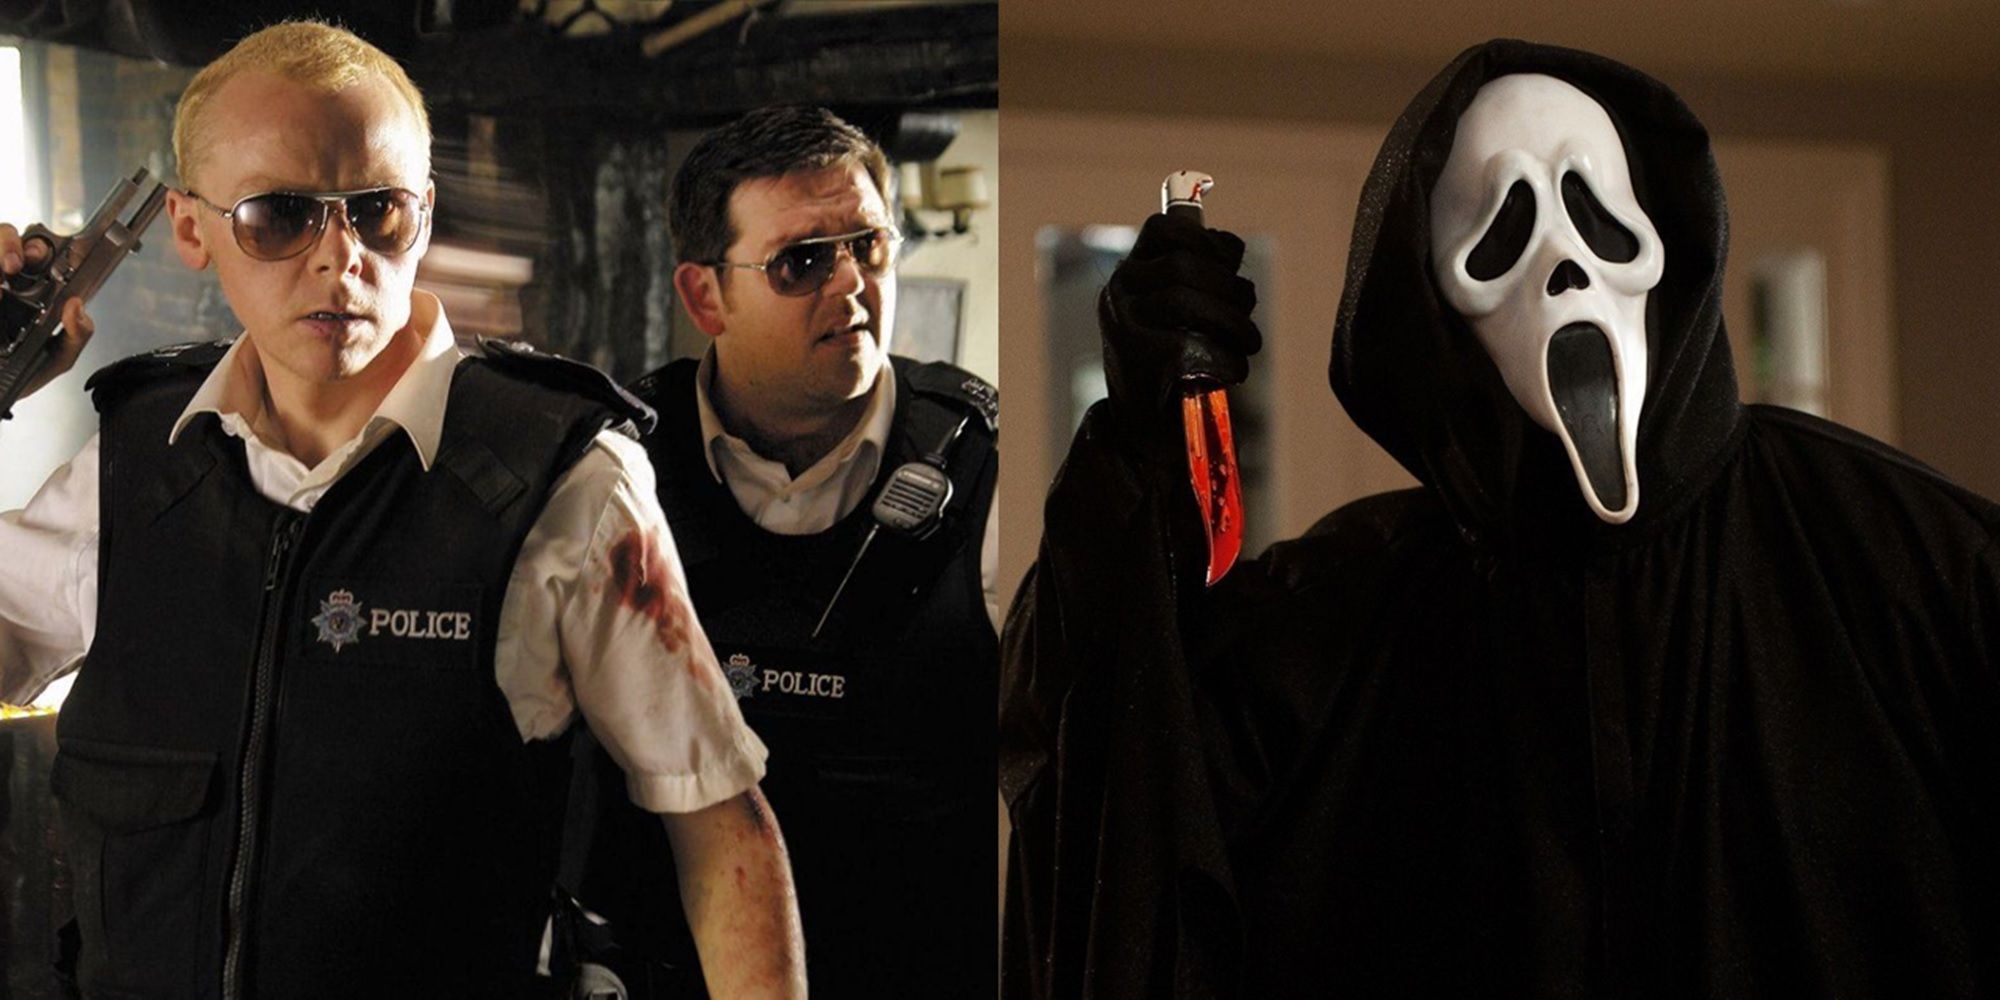 Nicholas and Danny in Hot Fuzz and the Ghostface killer in Scream